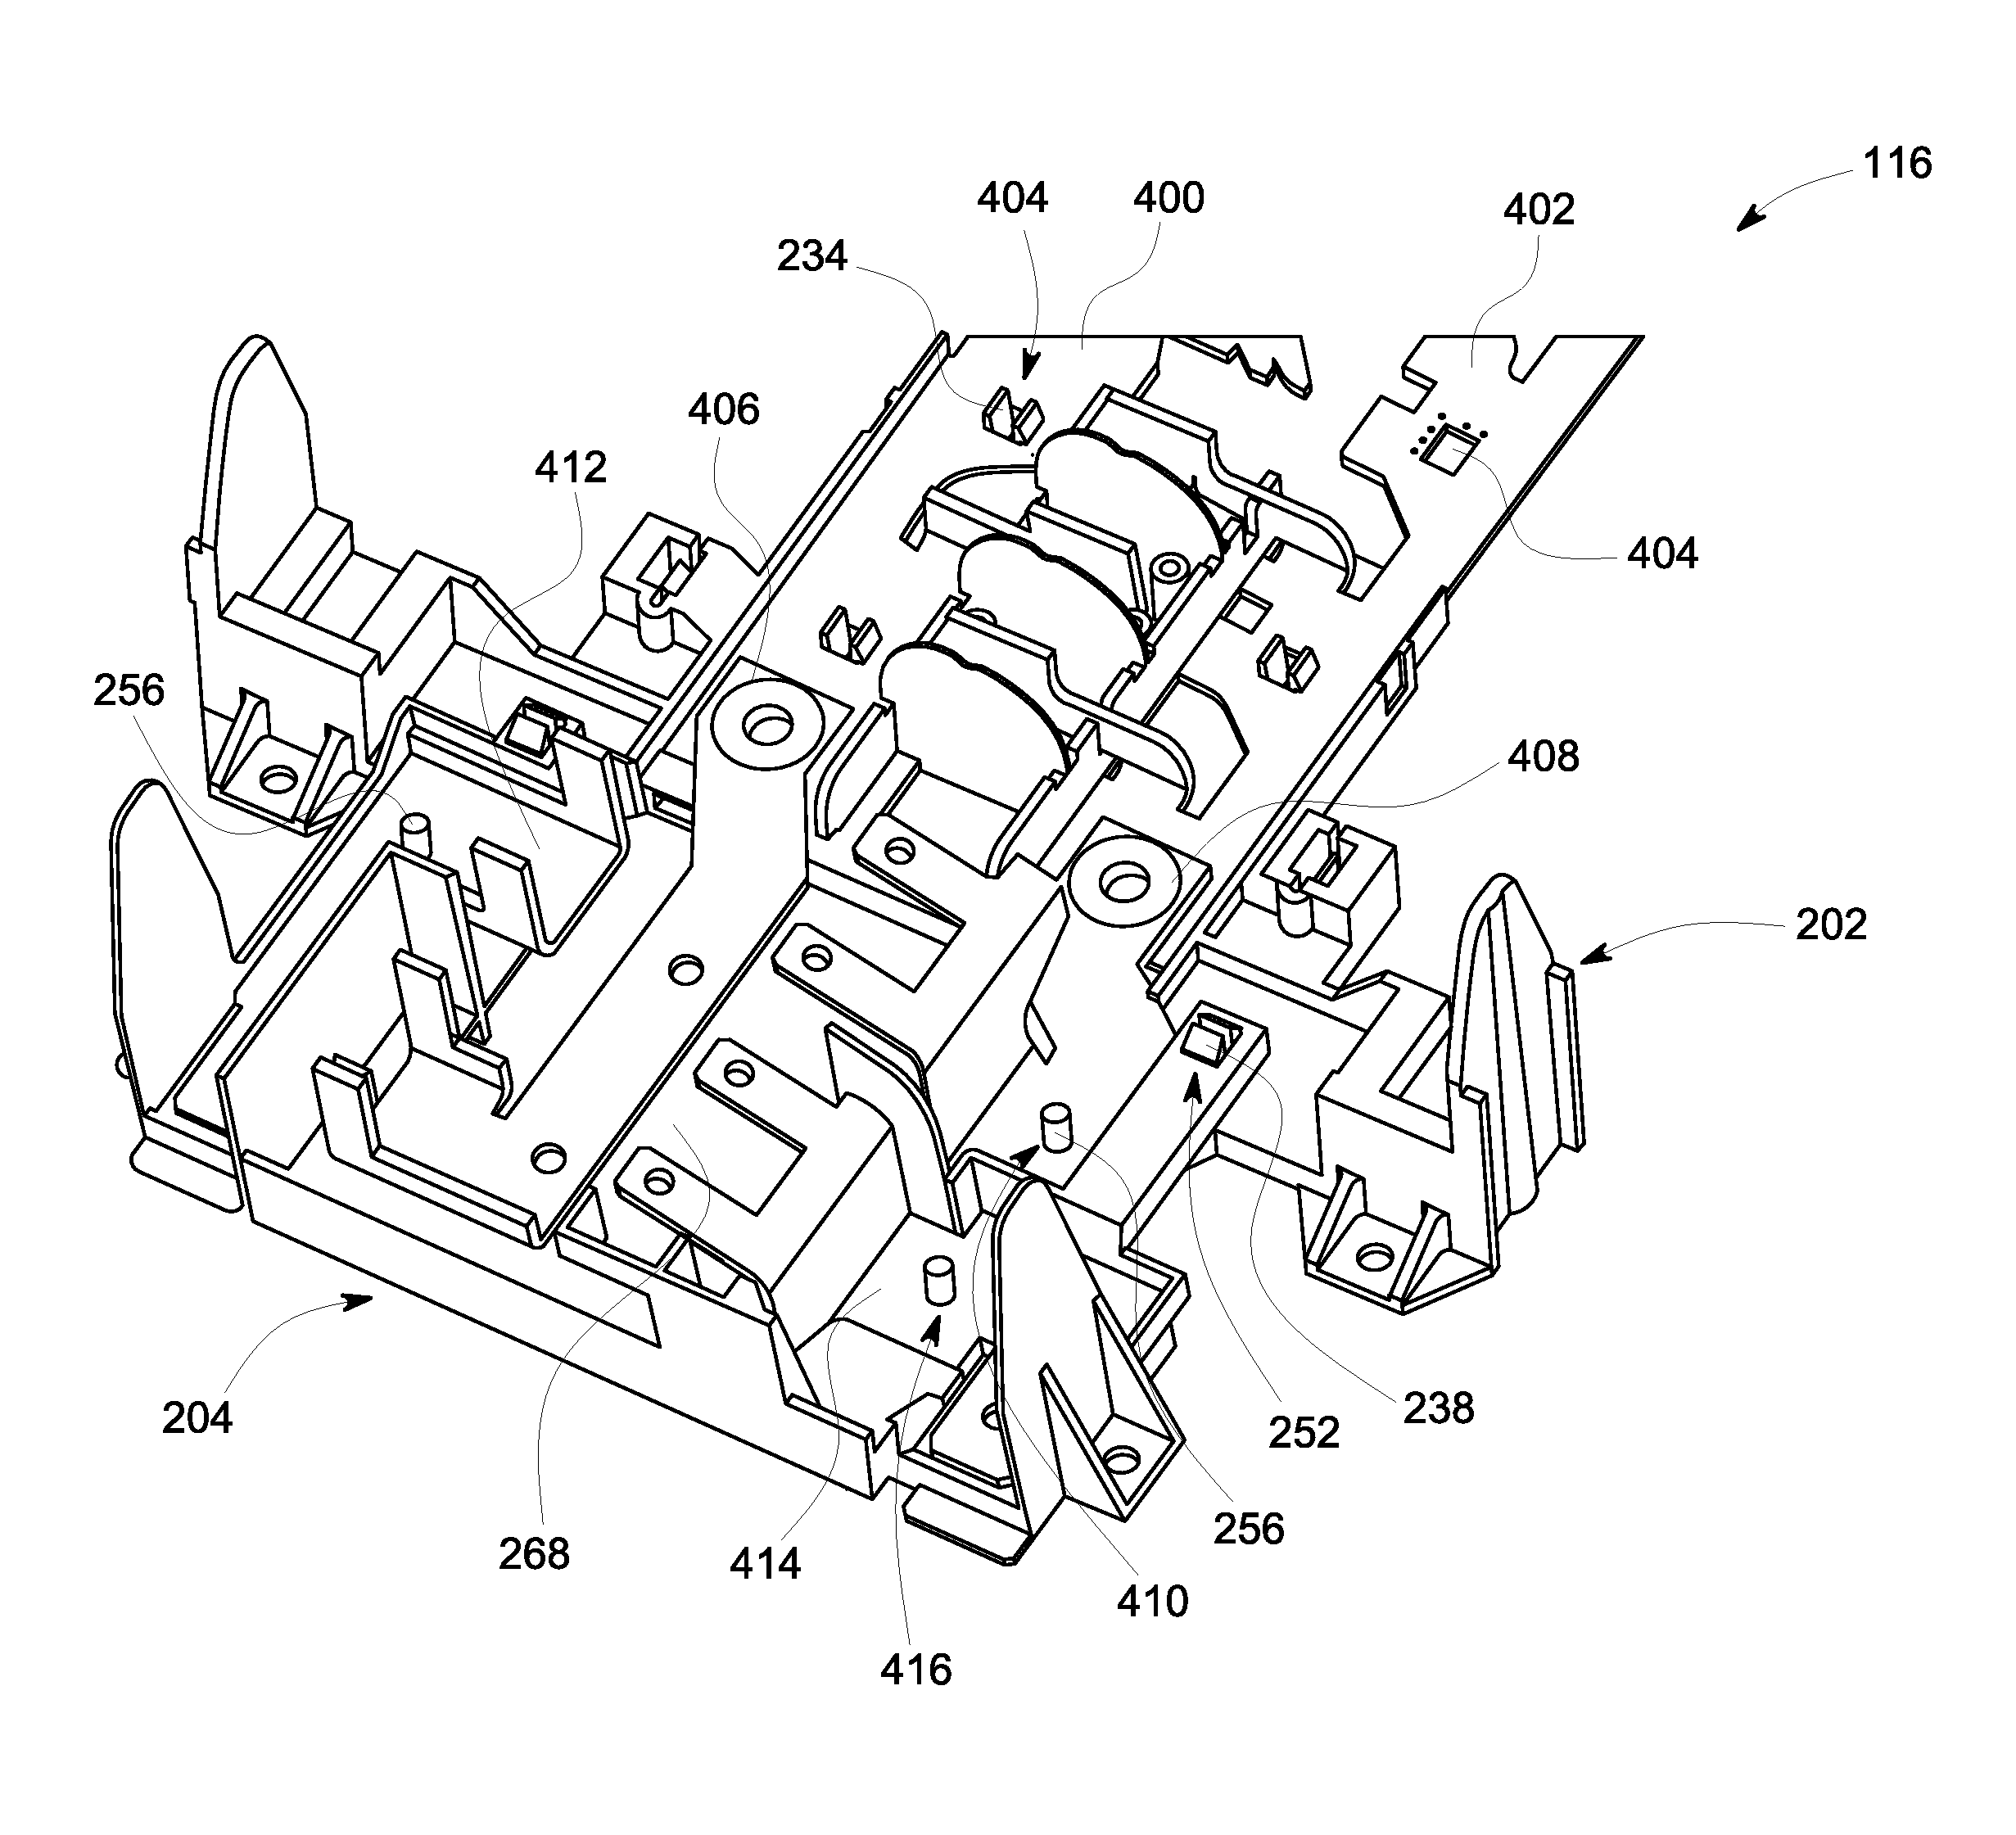 Heat transfer apparatus for use with electrical devices